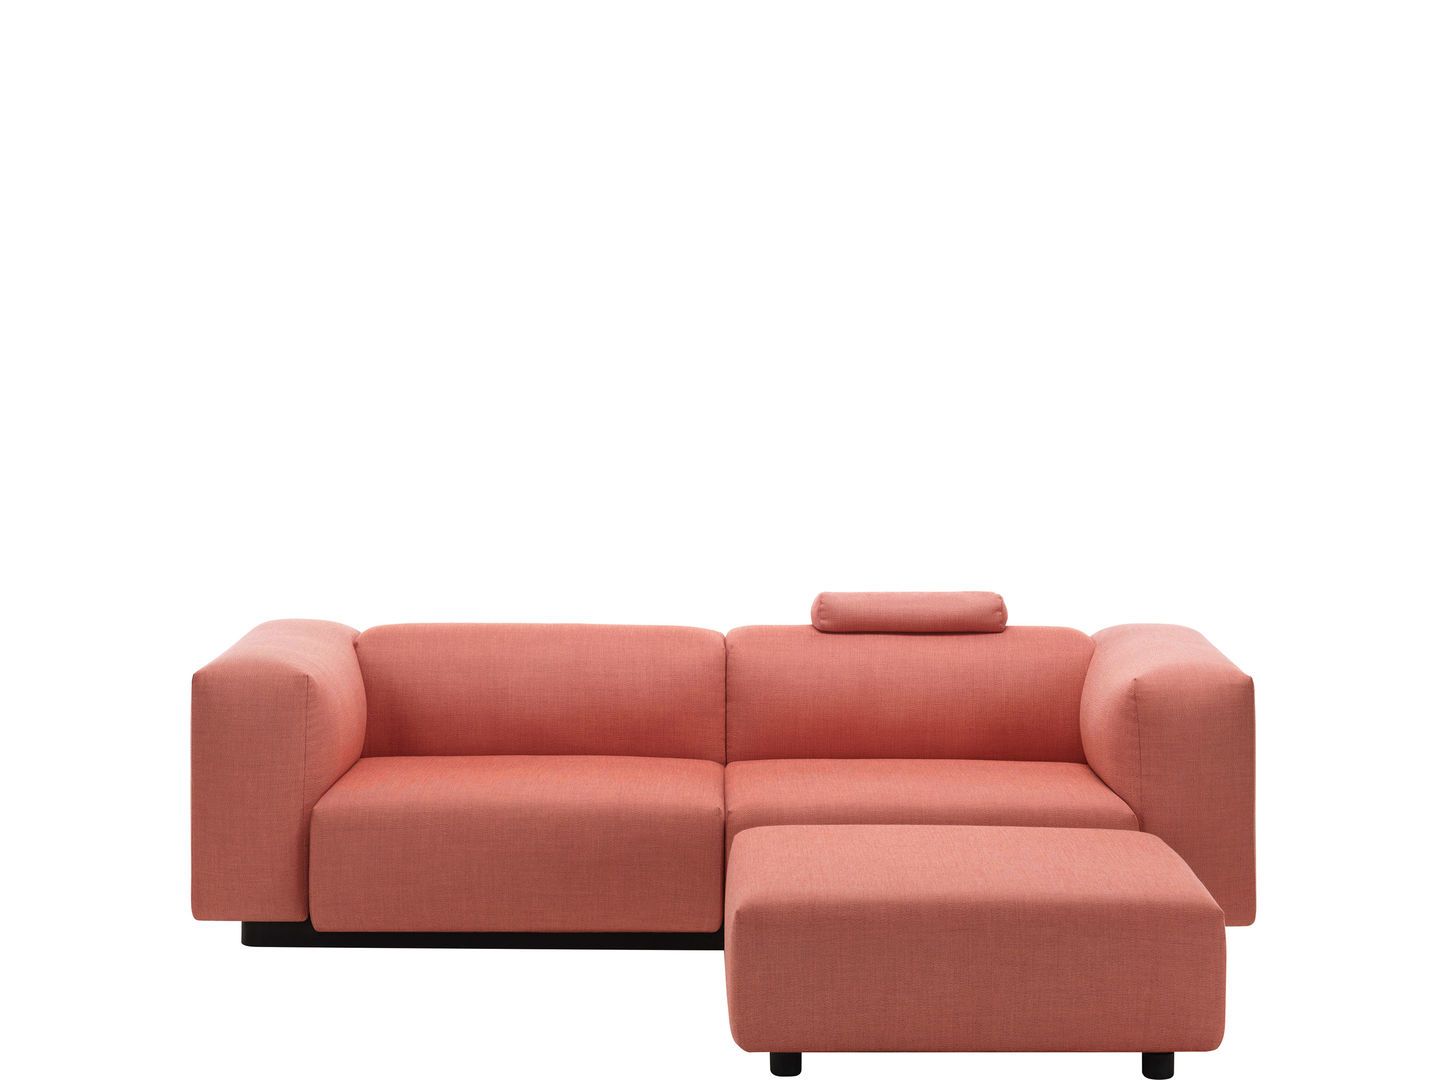 Vitra Soft Modular Sofa Two-seater and Ottoman from One52 Furniture